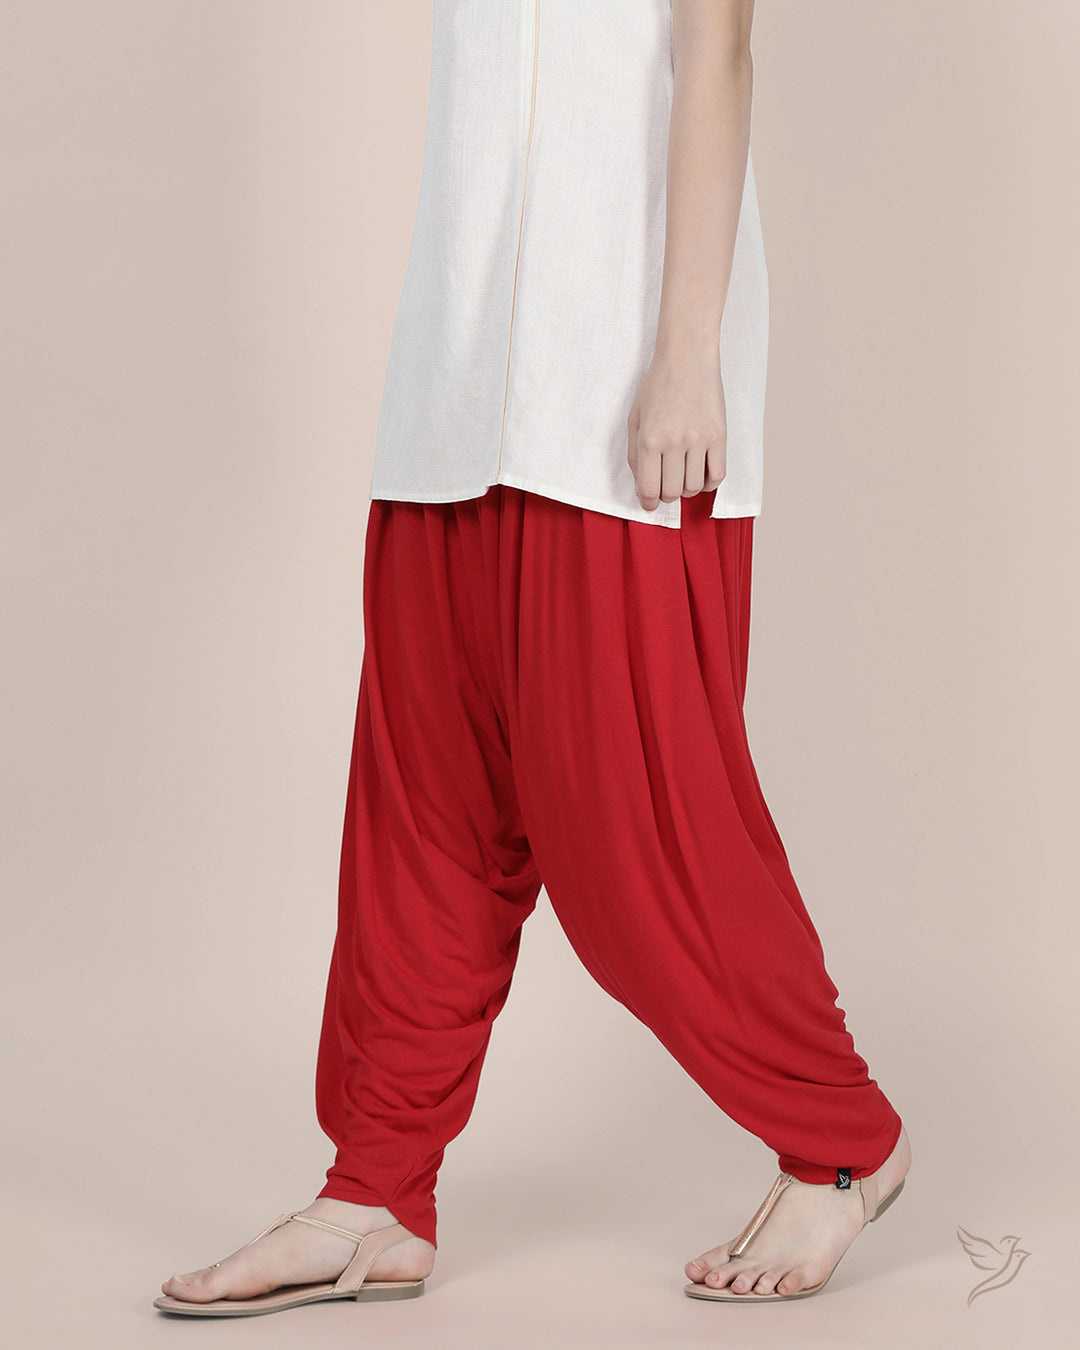 Lip stick Patiala Pant for College Girls